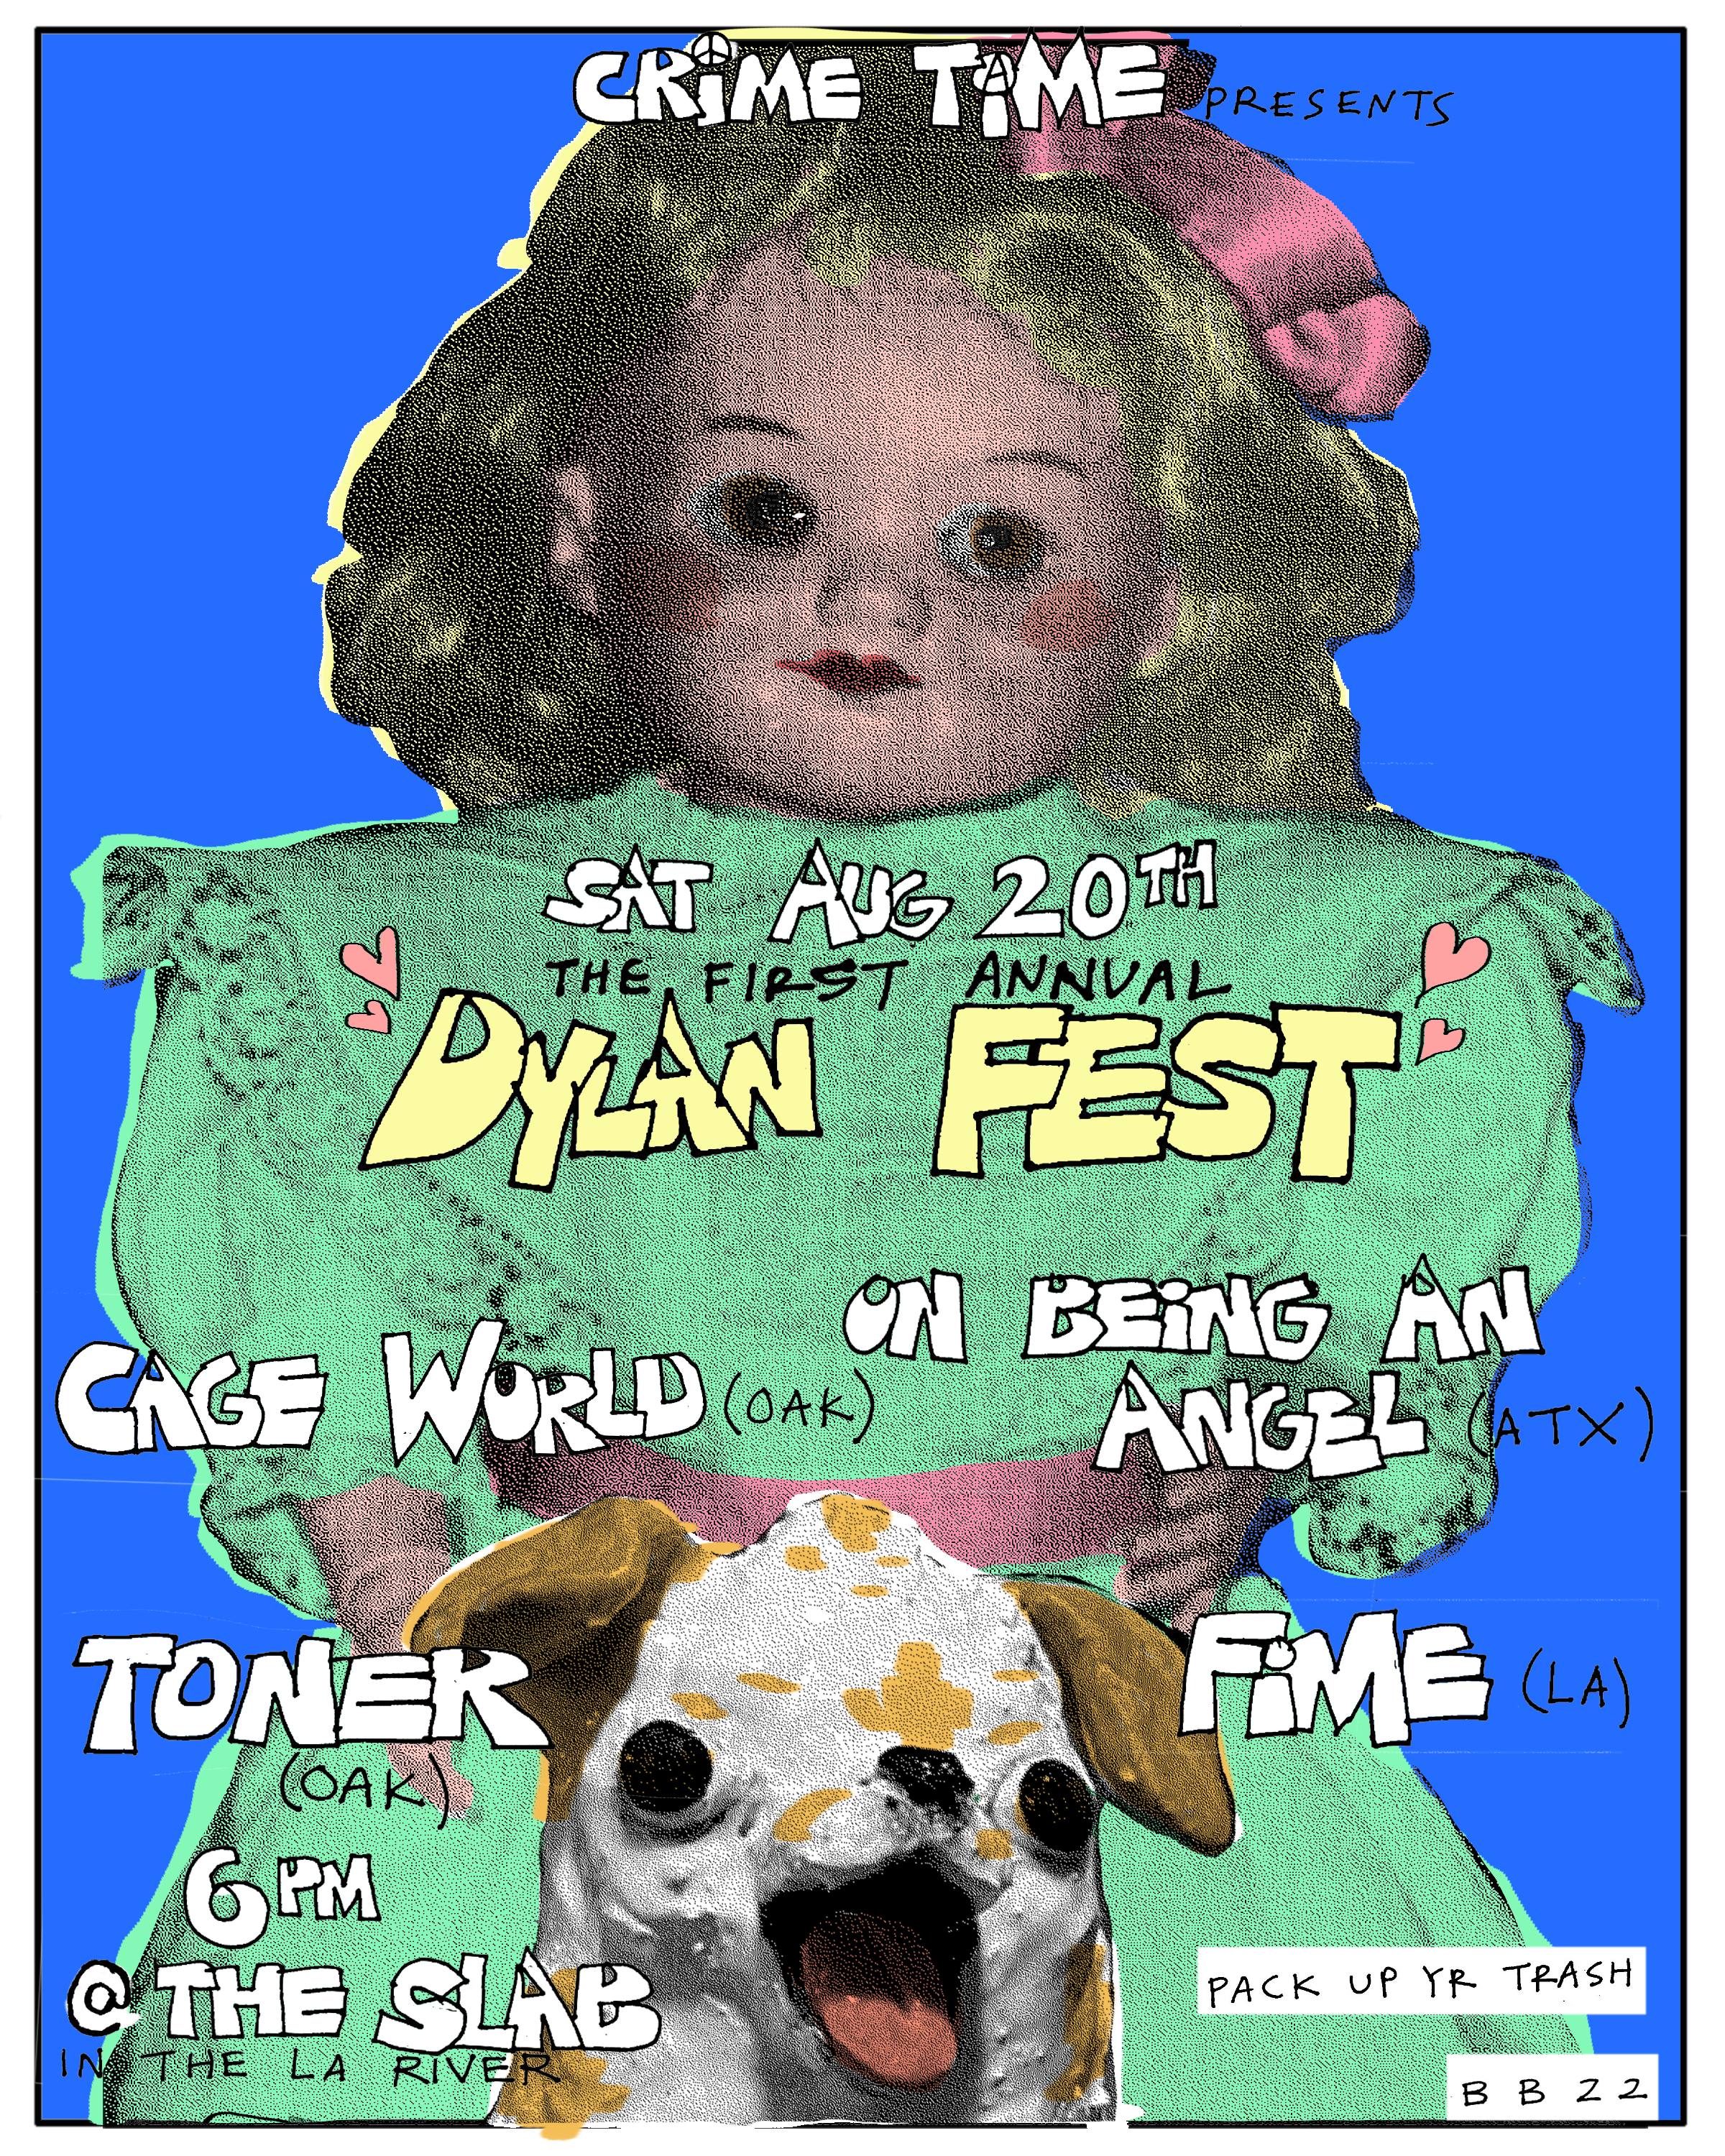 dylan's bday show